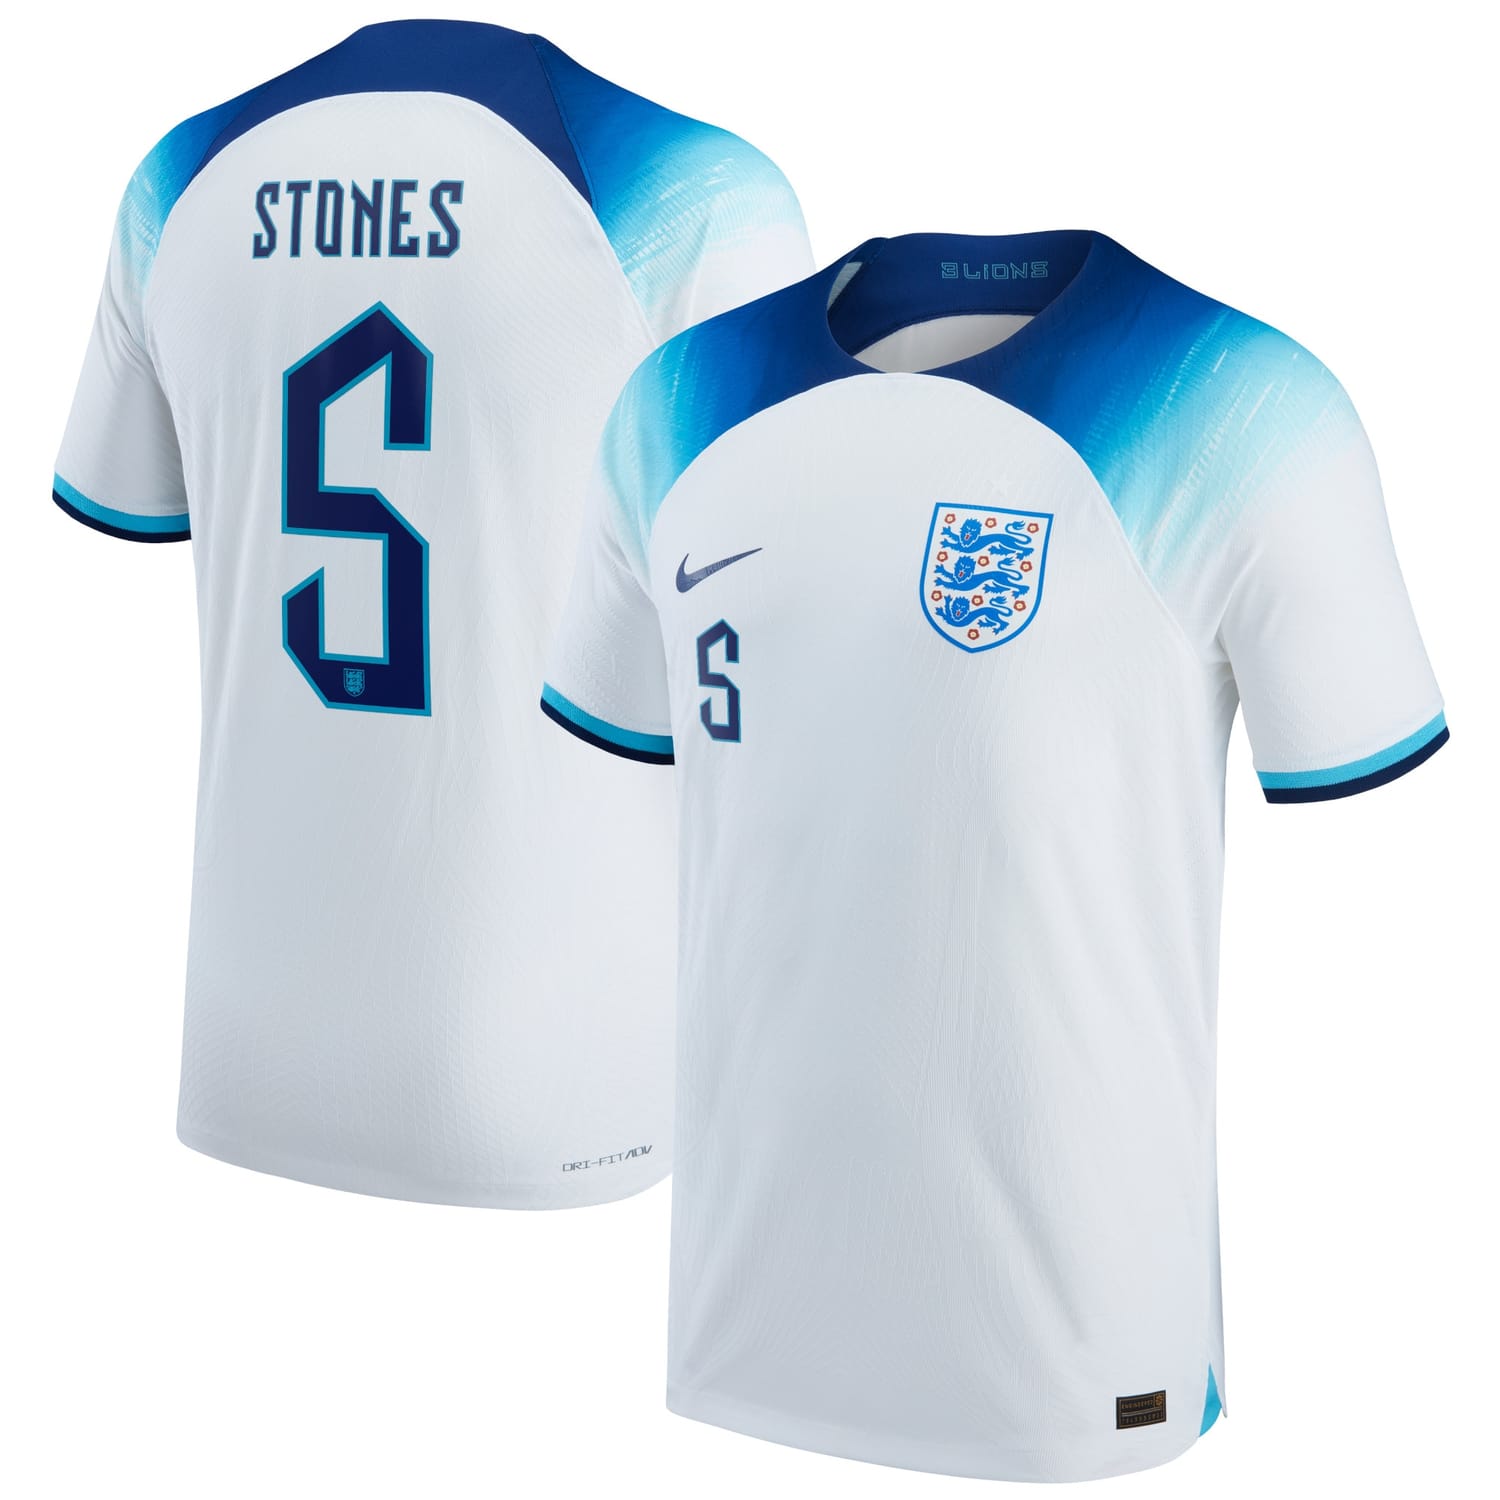 England National Team Home Authentic Jersey Shirt 2022 player John Stones 5 printing for Men